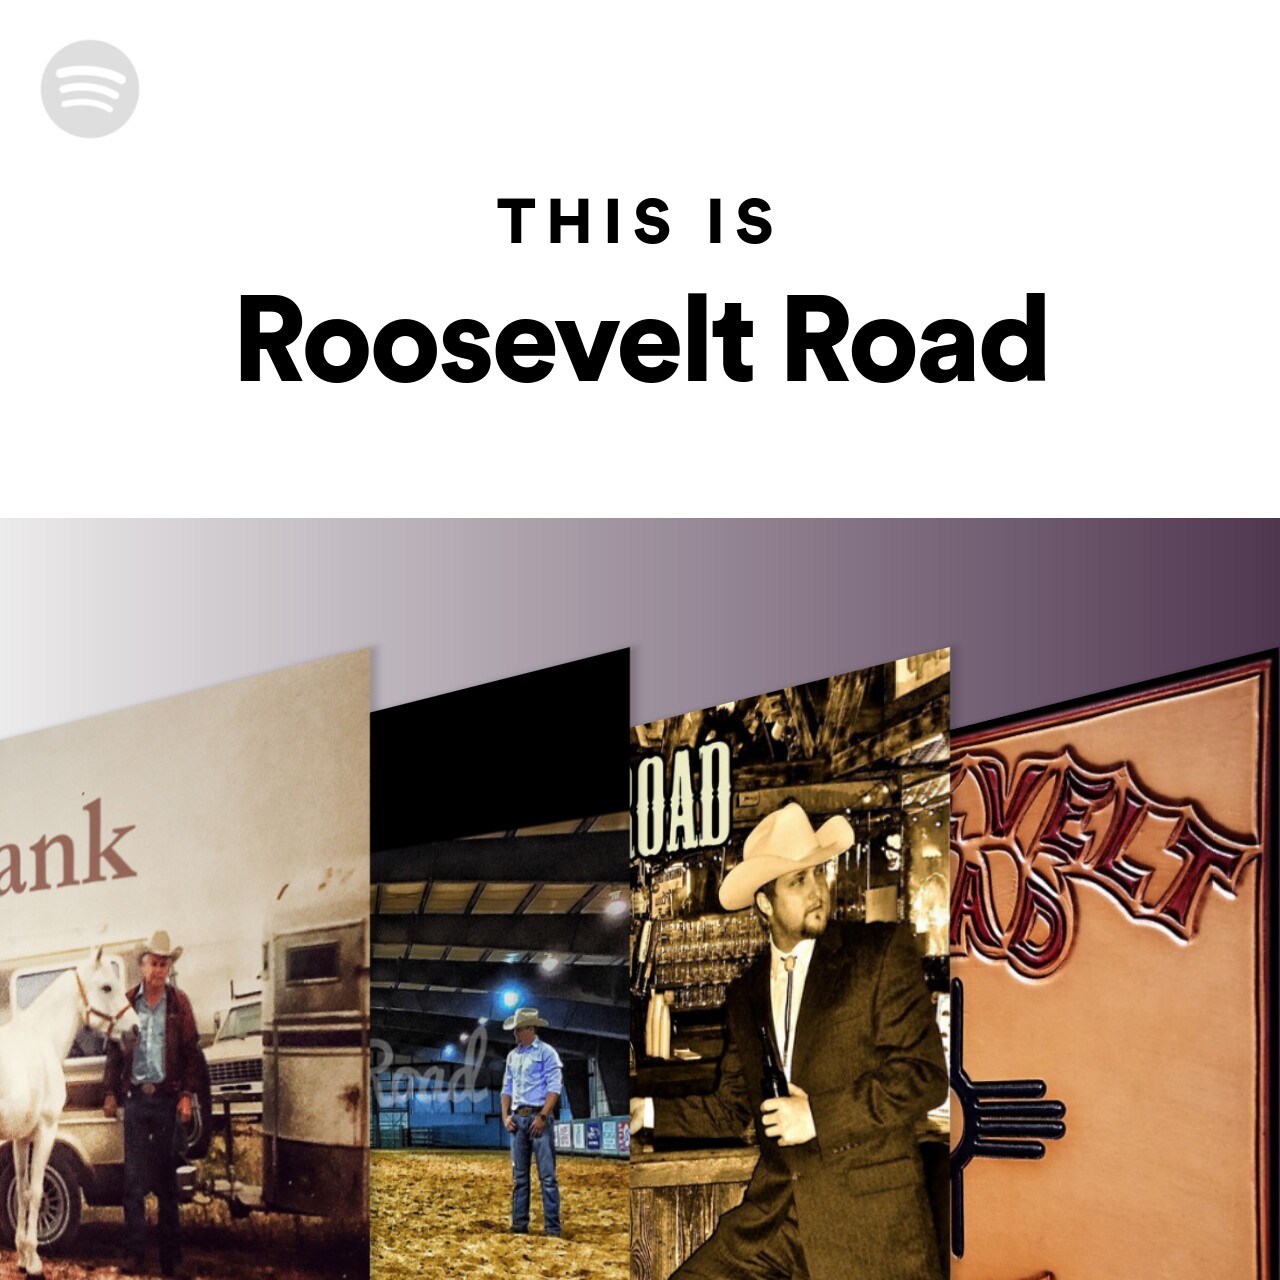 This Is Roosevelt Road